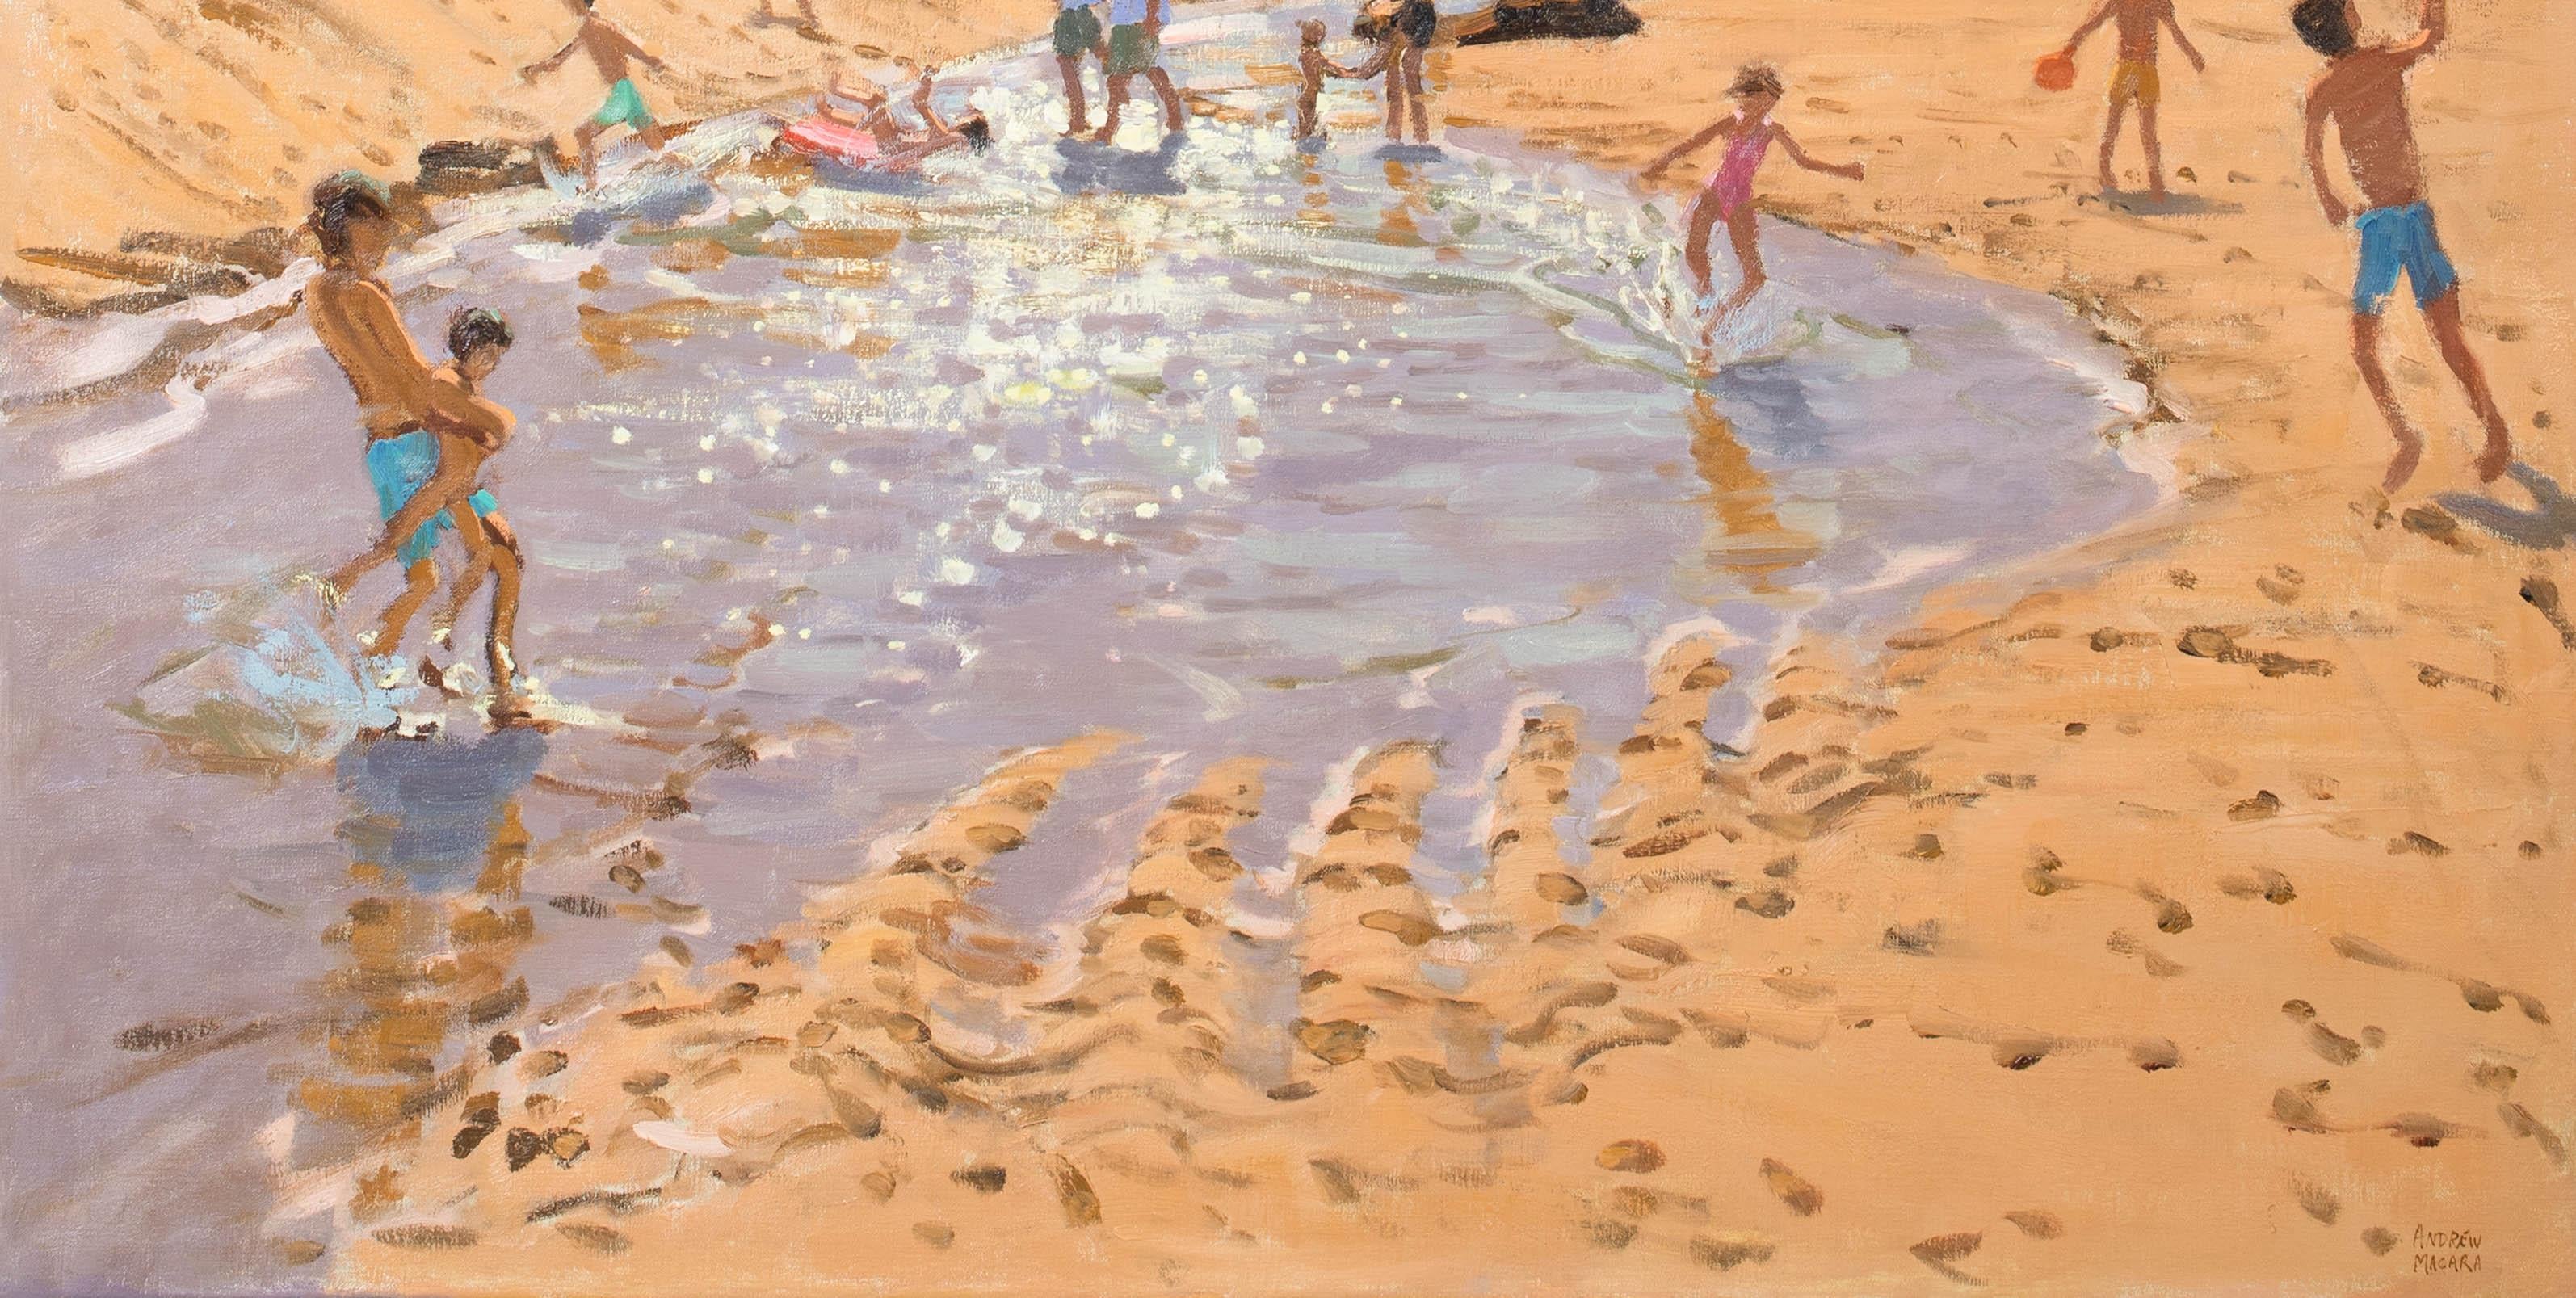 Beach Scene, 20th Century

by Andrew MACARA (b. 1944) Large Exhibited work

Huge 20th Century English Summer beach scene with children, oil on canvas by Andrew Macara. Leading example of the prolific beach scene artists work both in terms of quality